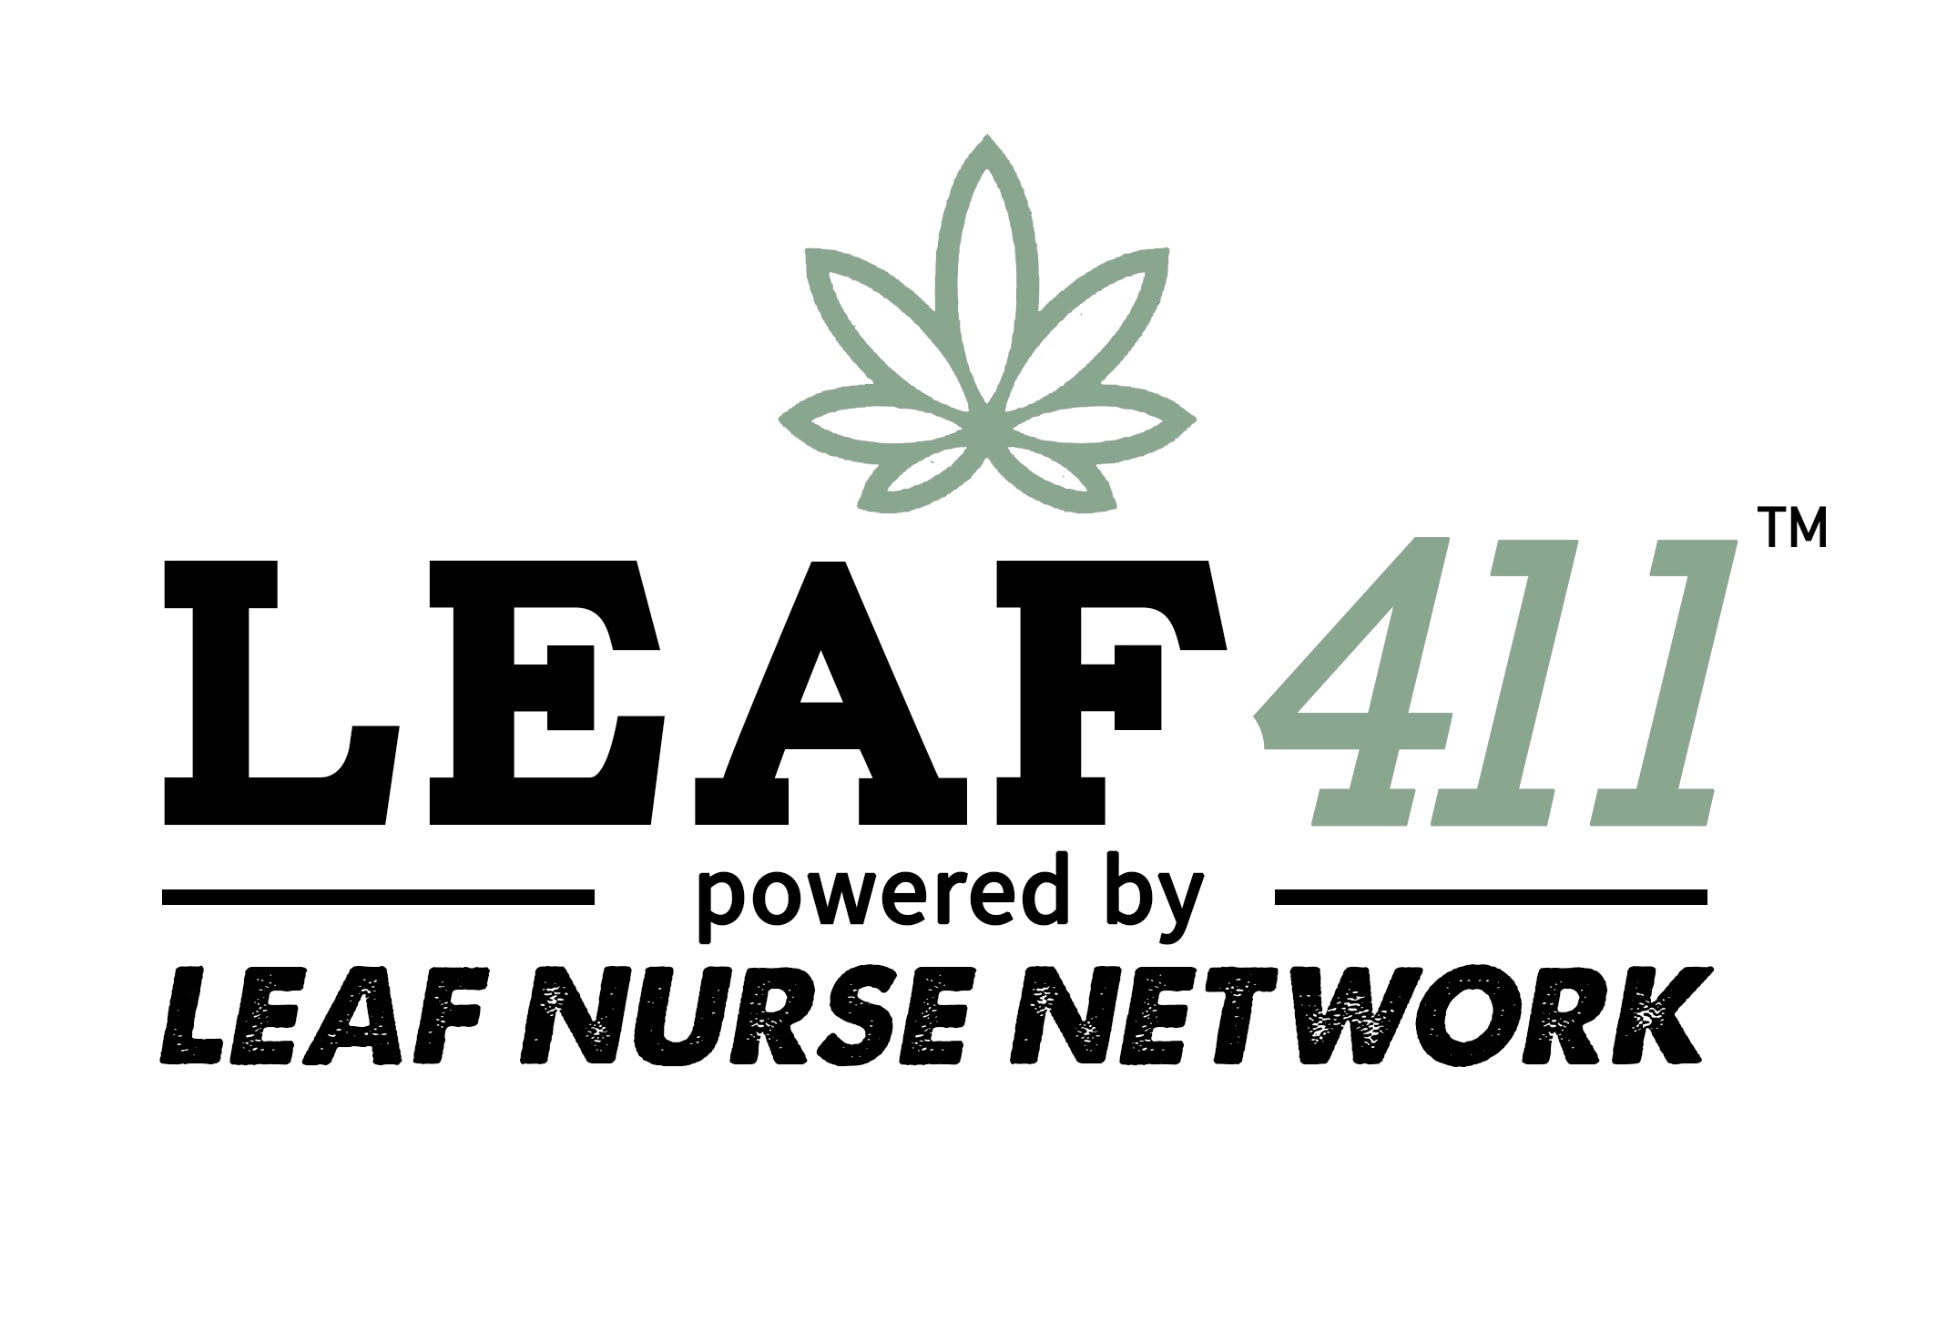 Leaf411, Cannabis Doing Good Partner to Provide Free Nurse-led Guidance Calls to Celebrate 4/20